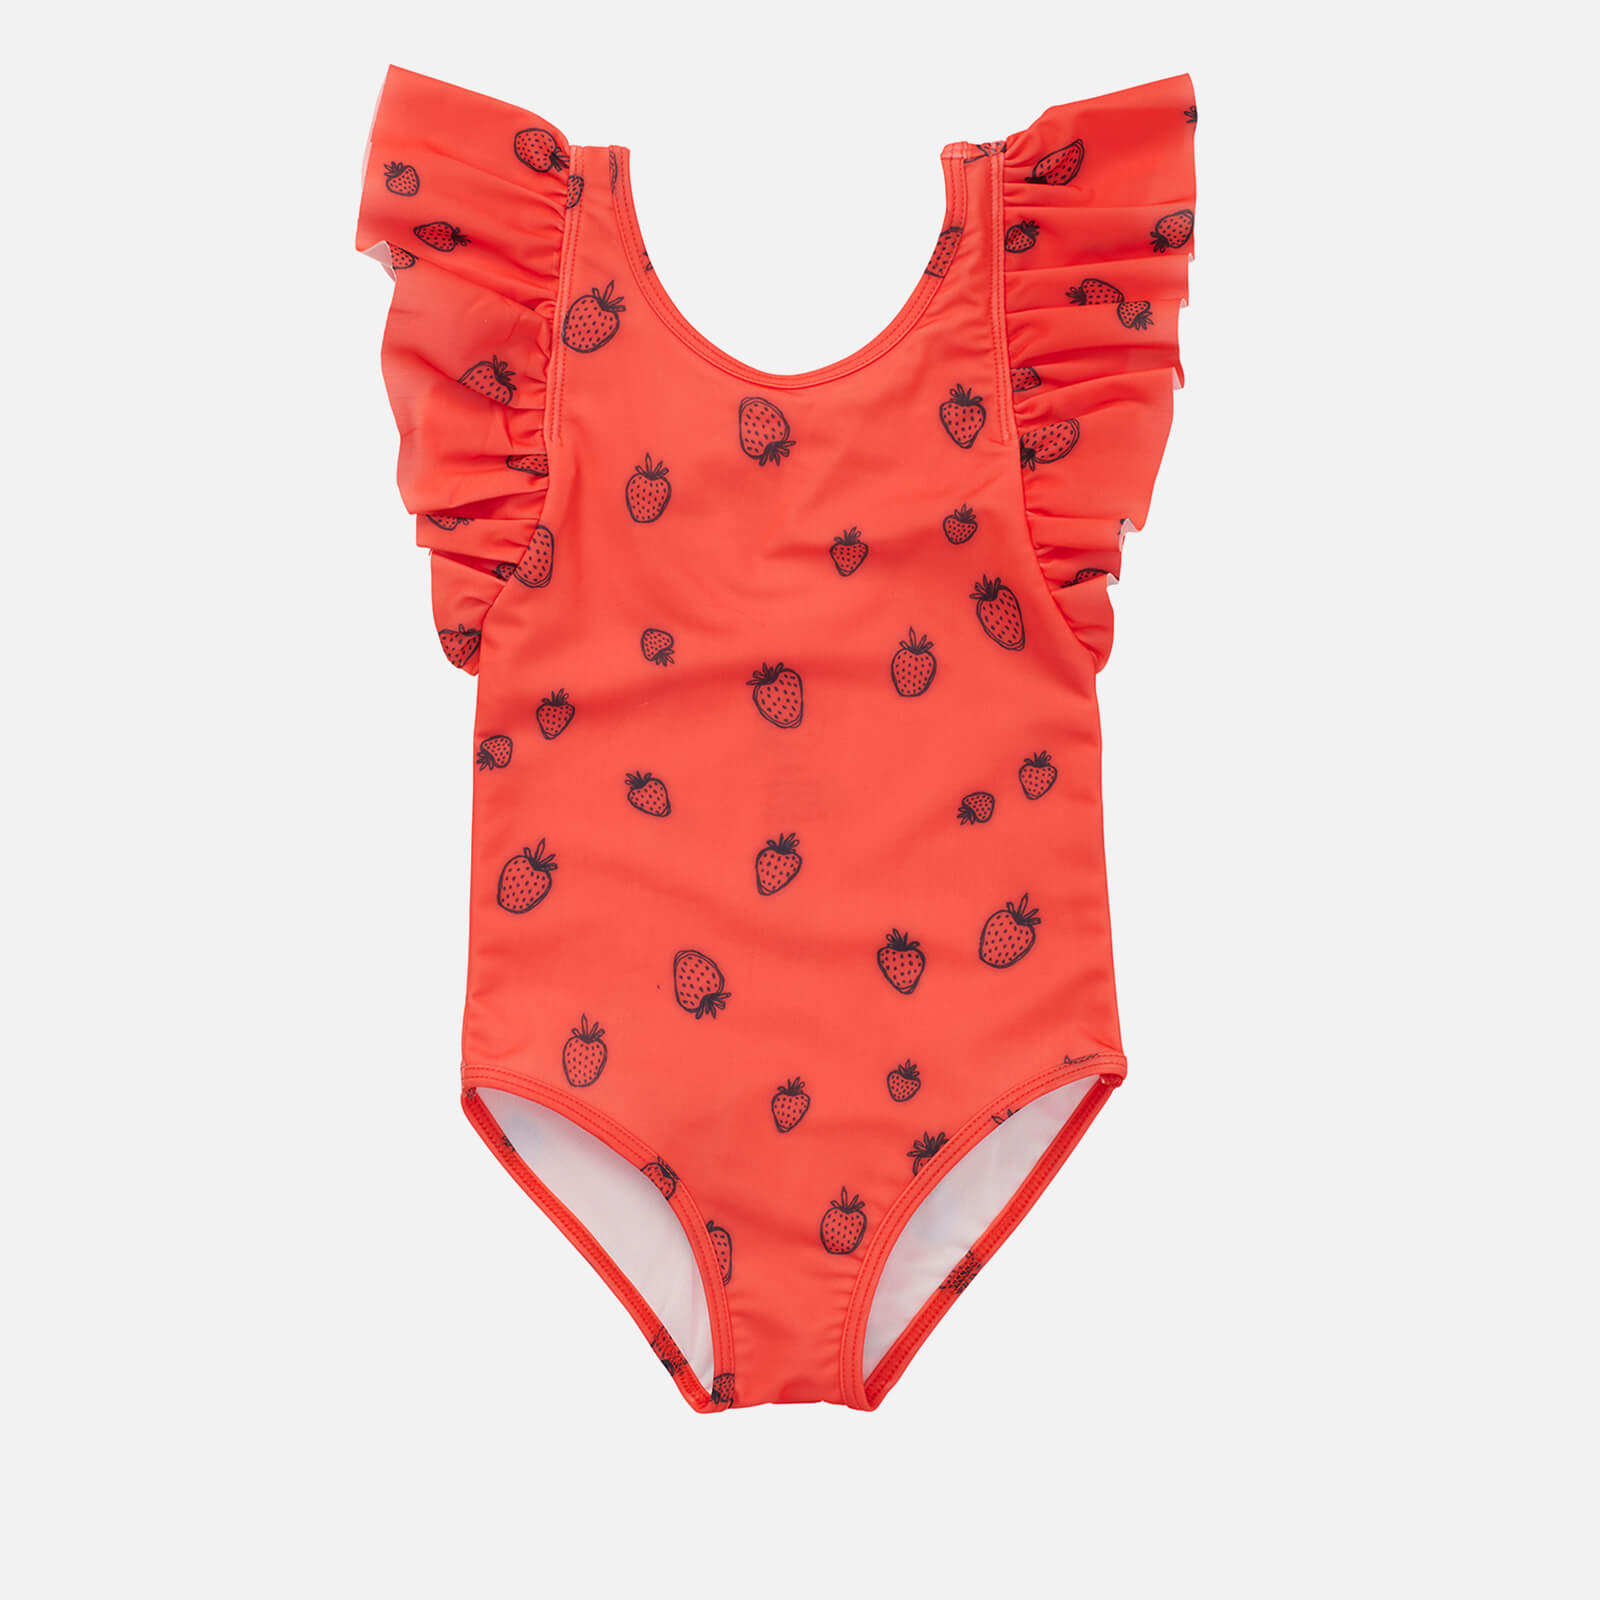 Sproet + Sprout Strawberry Swimsuit - Poppy Red - 6 Months